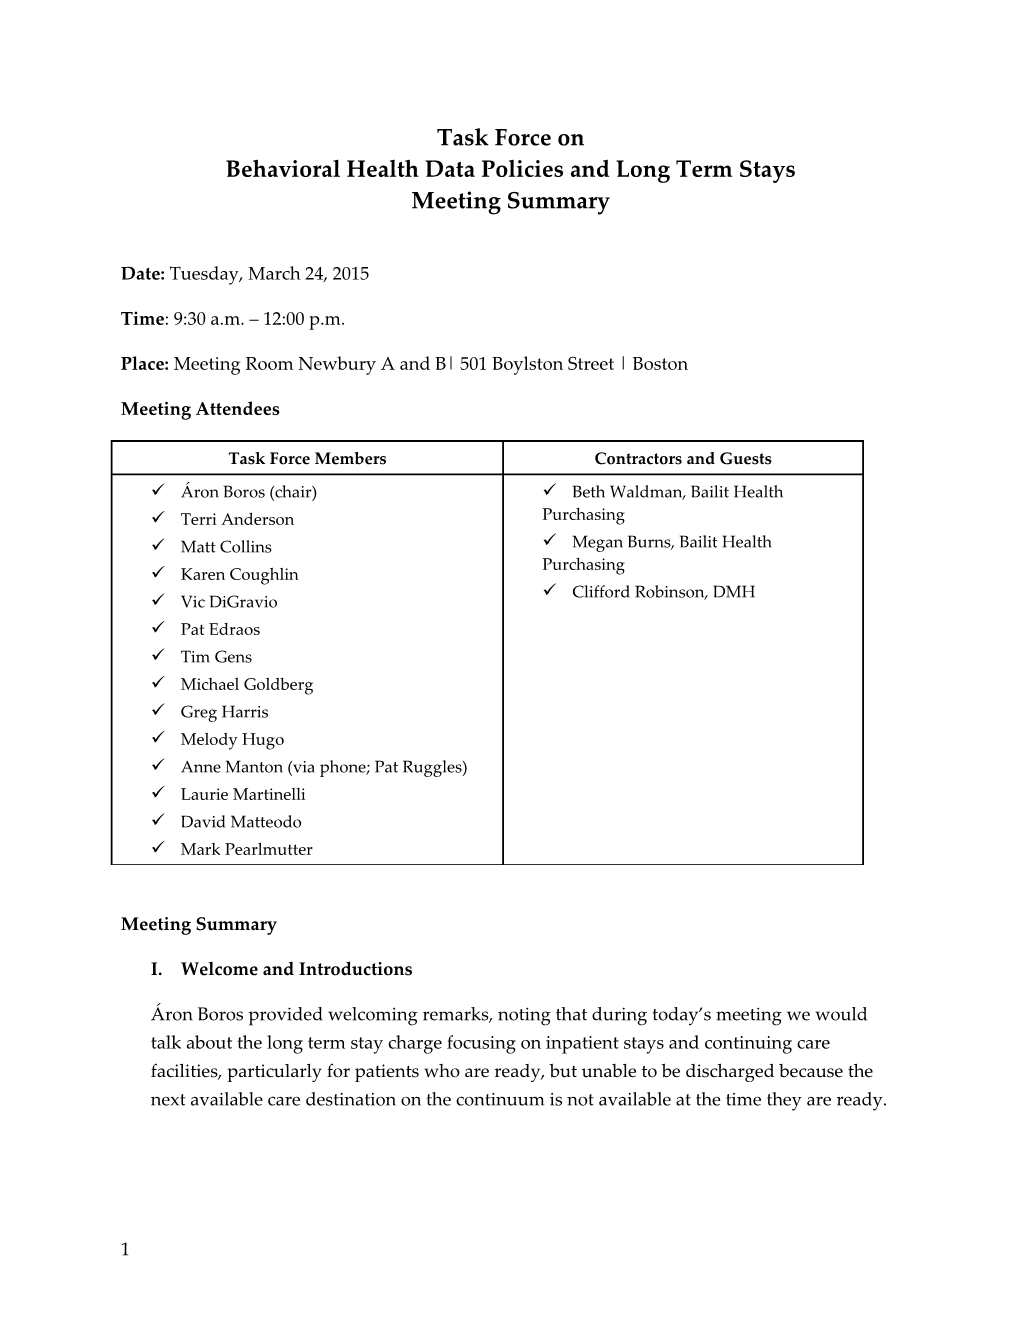 Behavioral Health Data Policies and Long Term Stays